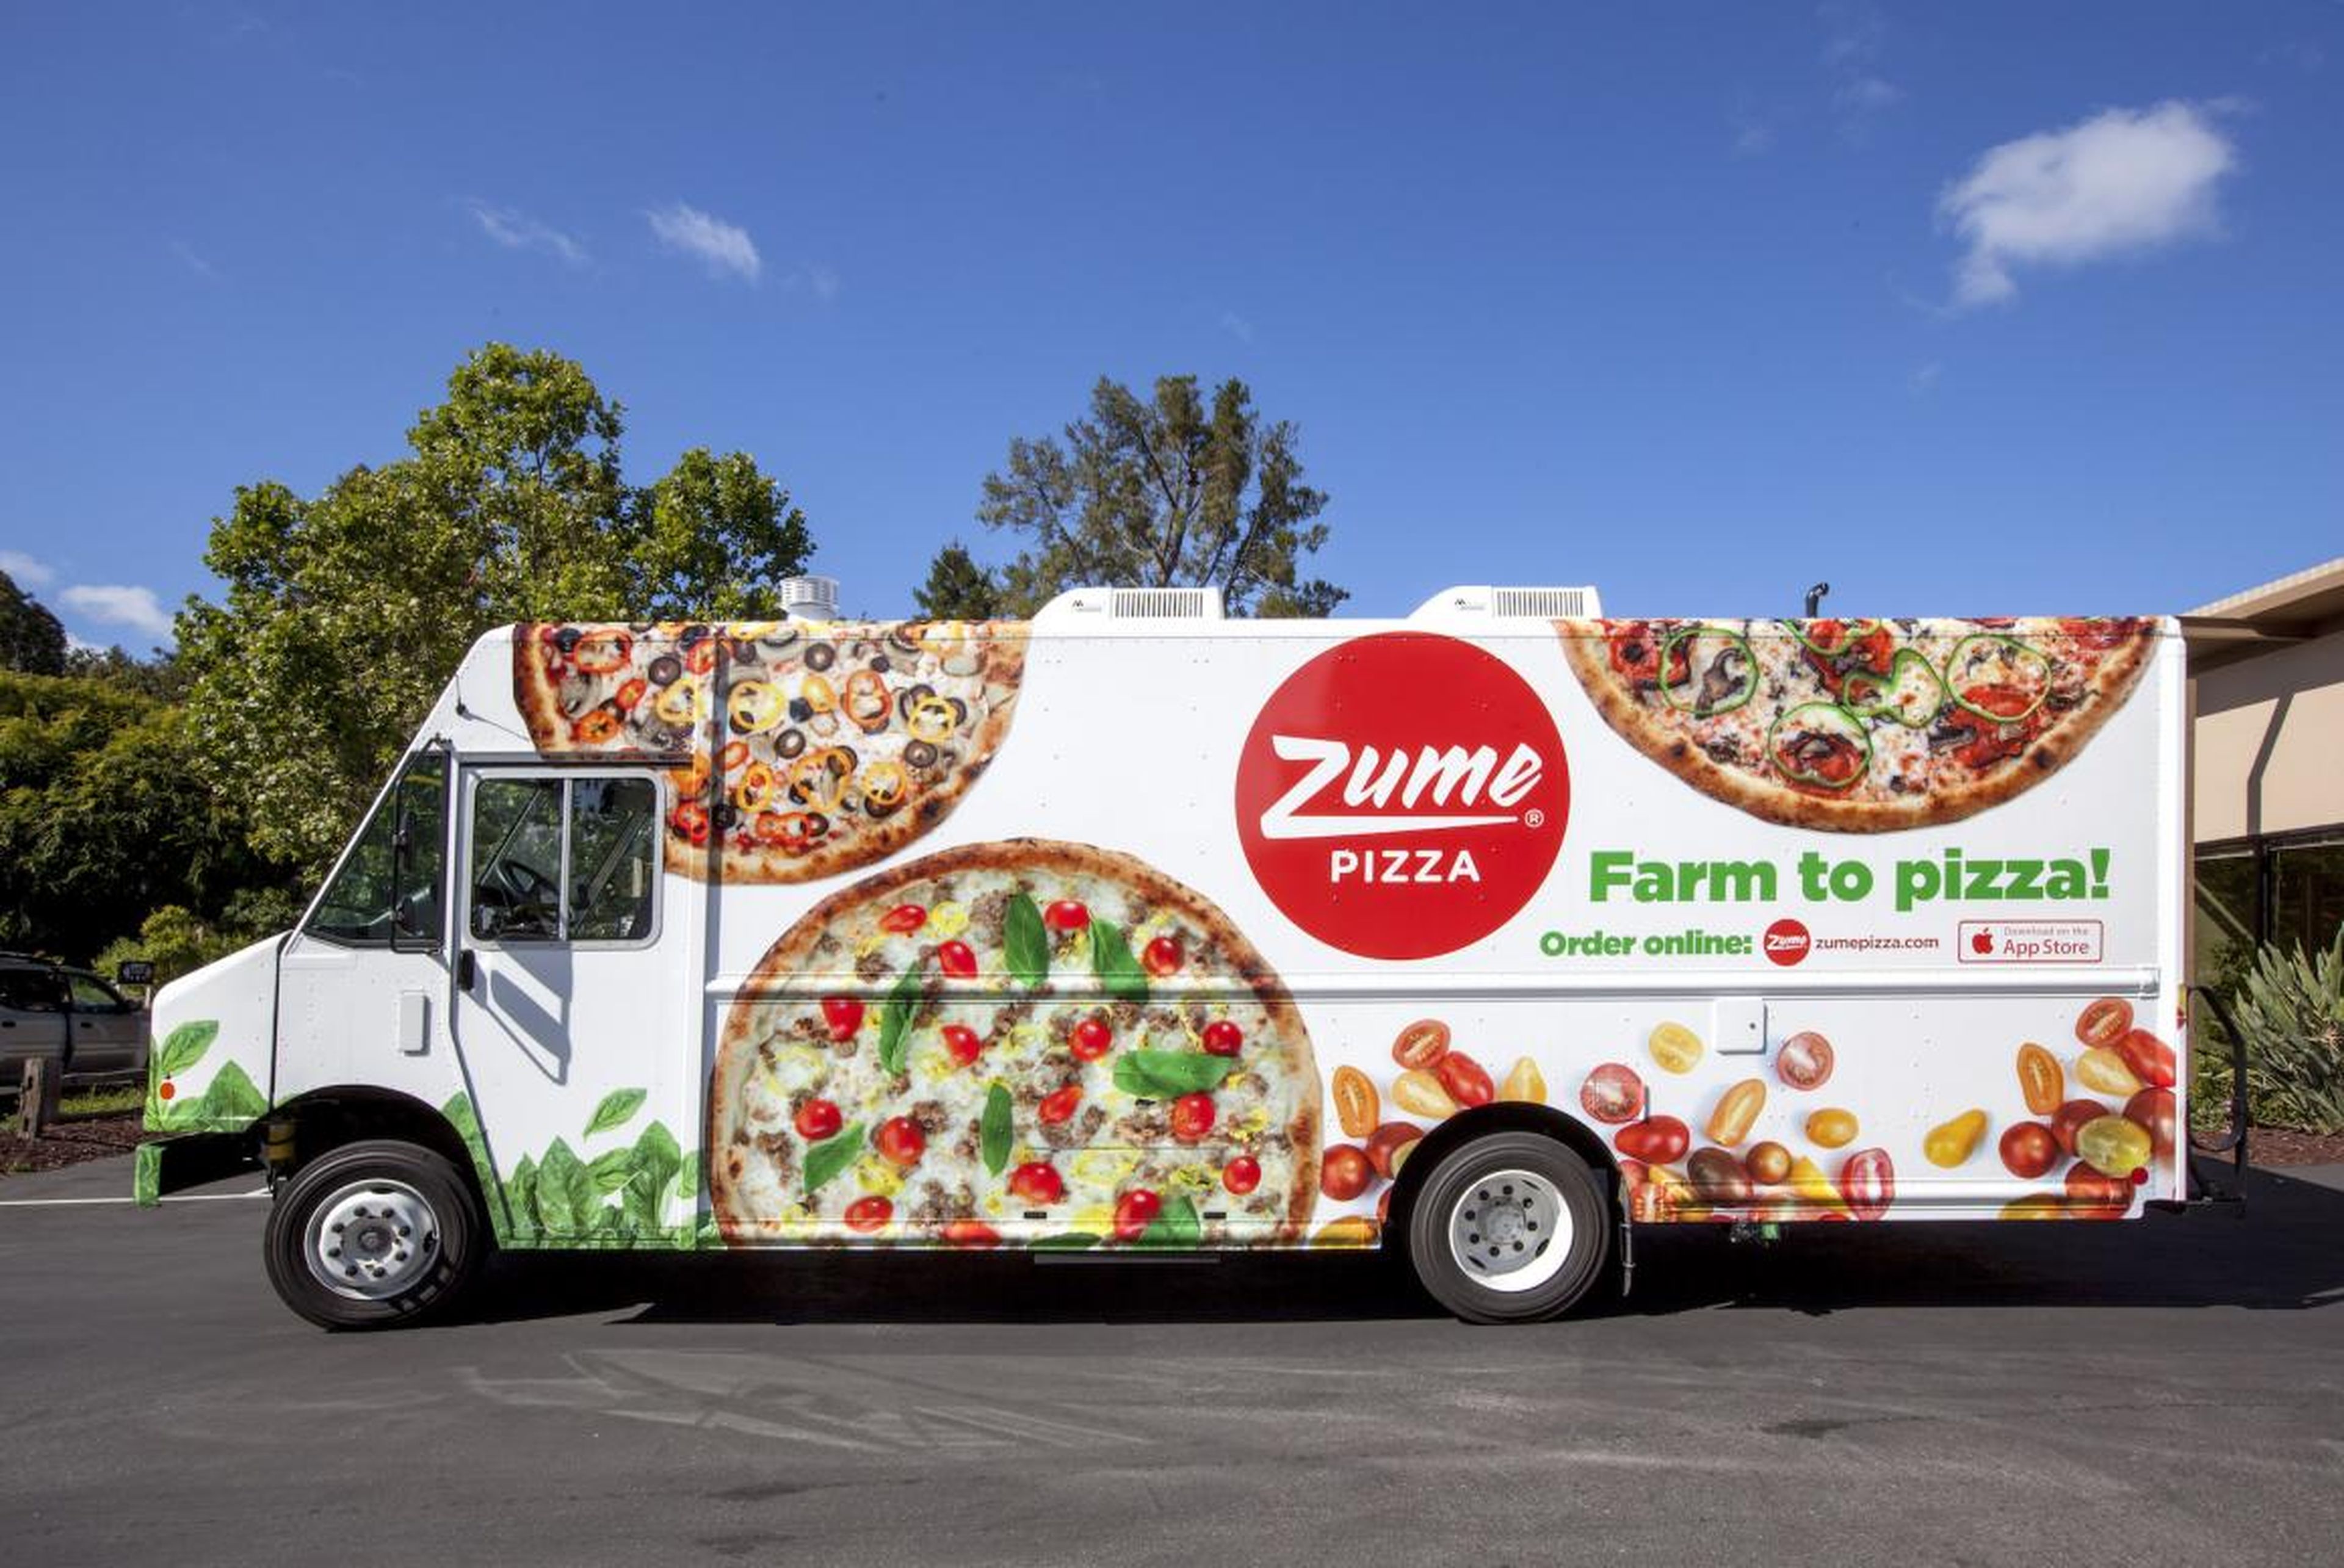 In September 2016, Zume debuted a new kind of delivery vehicle.